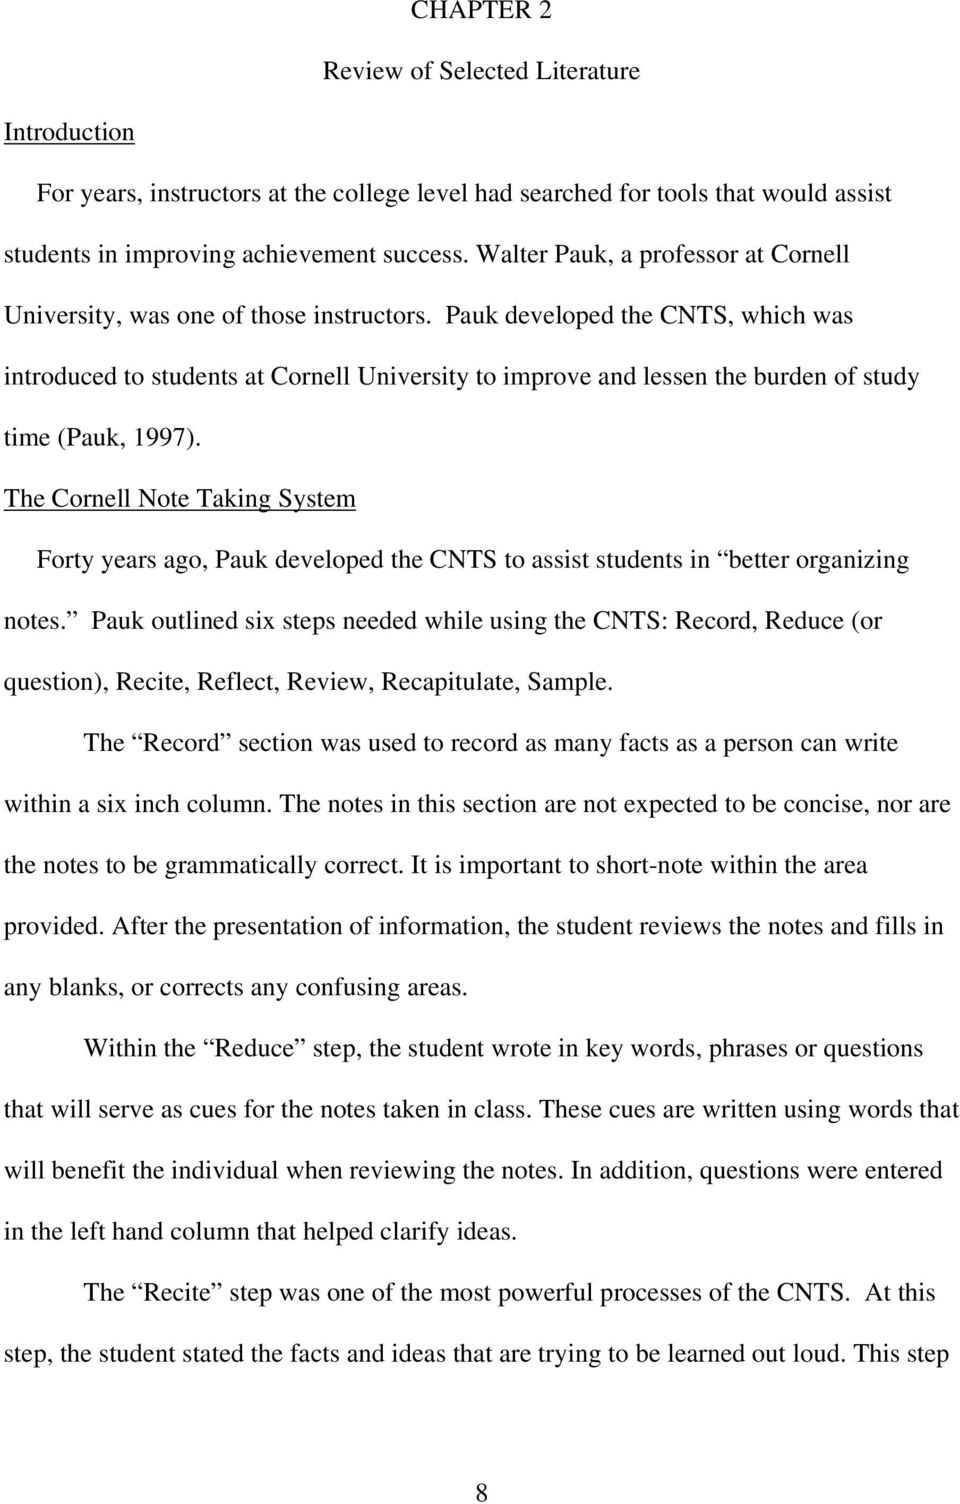 Pauk developed the CNTS, which was introduced to students at Cornell University to improve and lessen the burden of study time (Pauk, 1997).